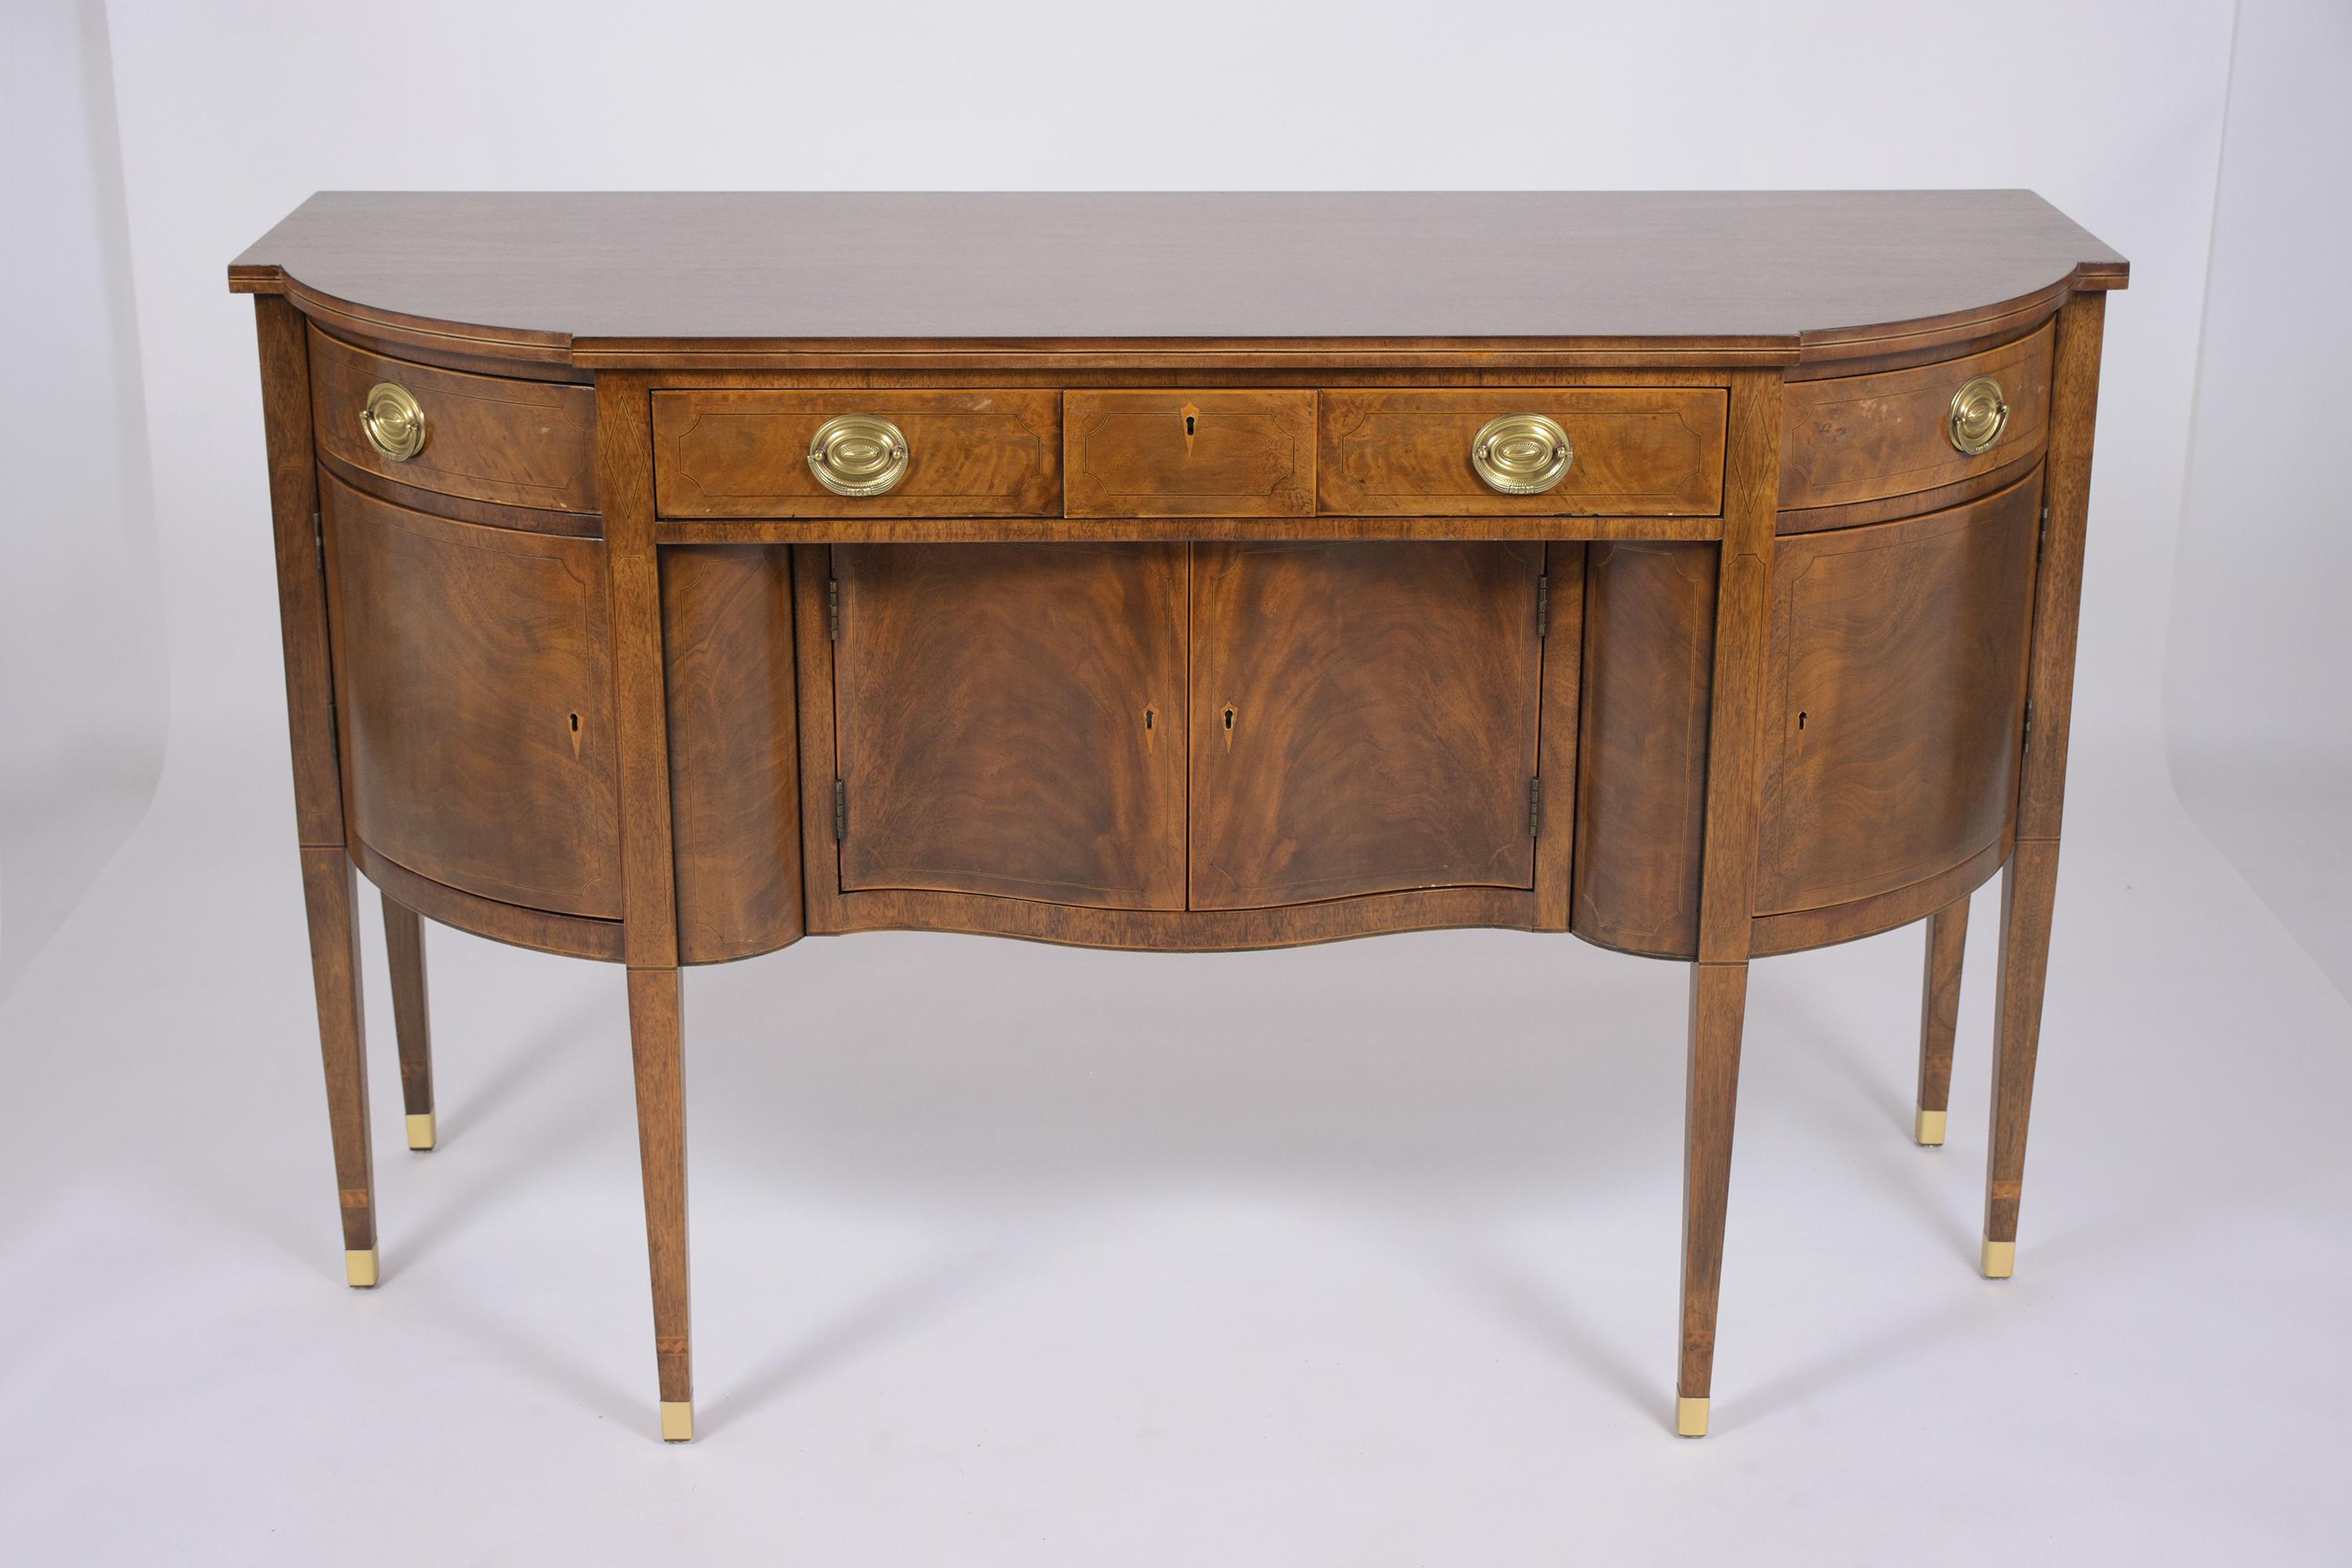 An extraordinary English George III buffet is beautifully crafted out of walnut wood and has been professionally restored by our team of expert craftsmen. This vintage sideboard comes with inlaid marquetry throughout, three drawers with brass pulls,